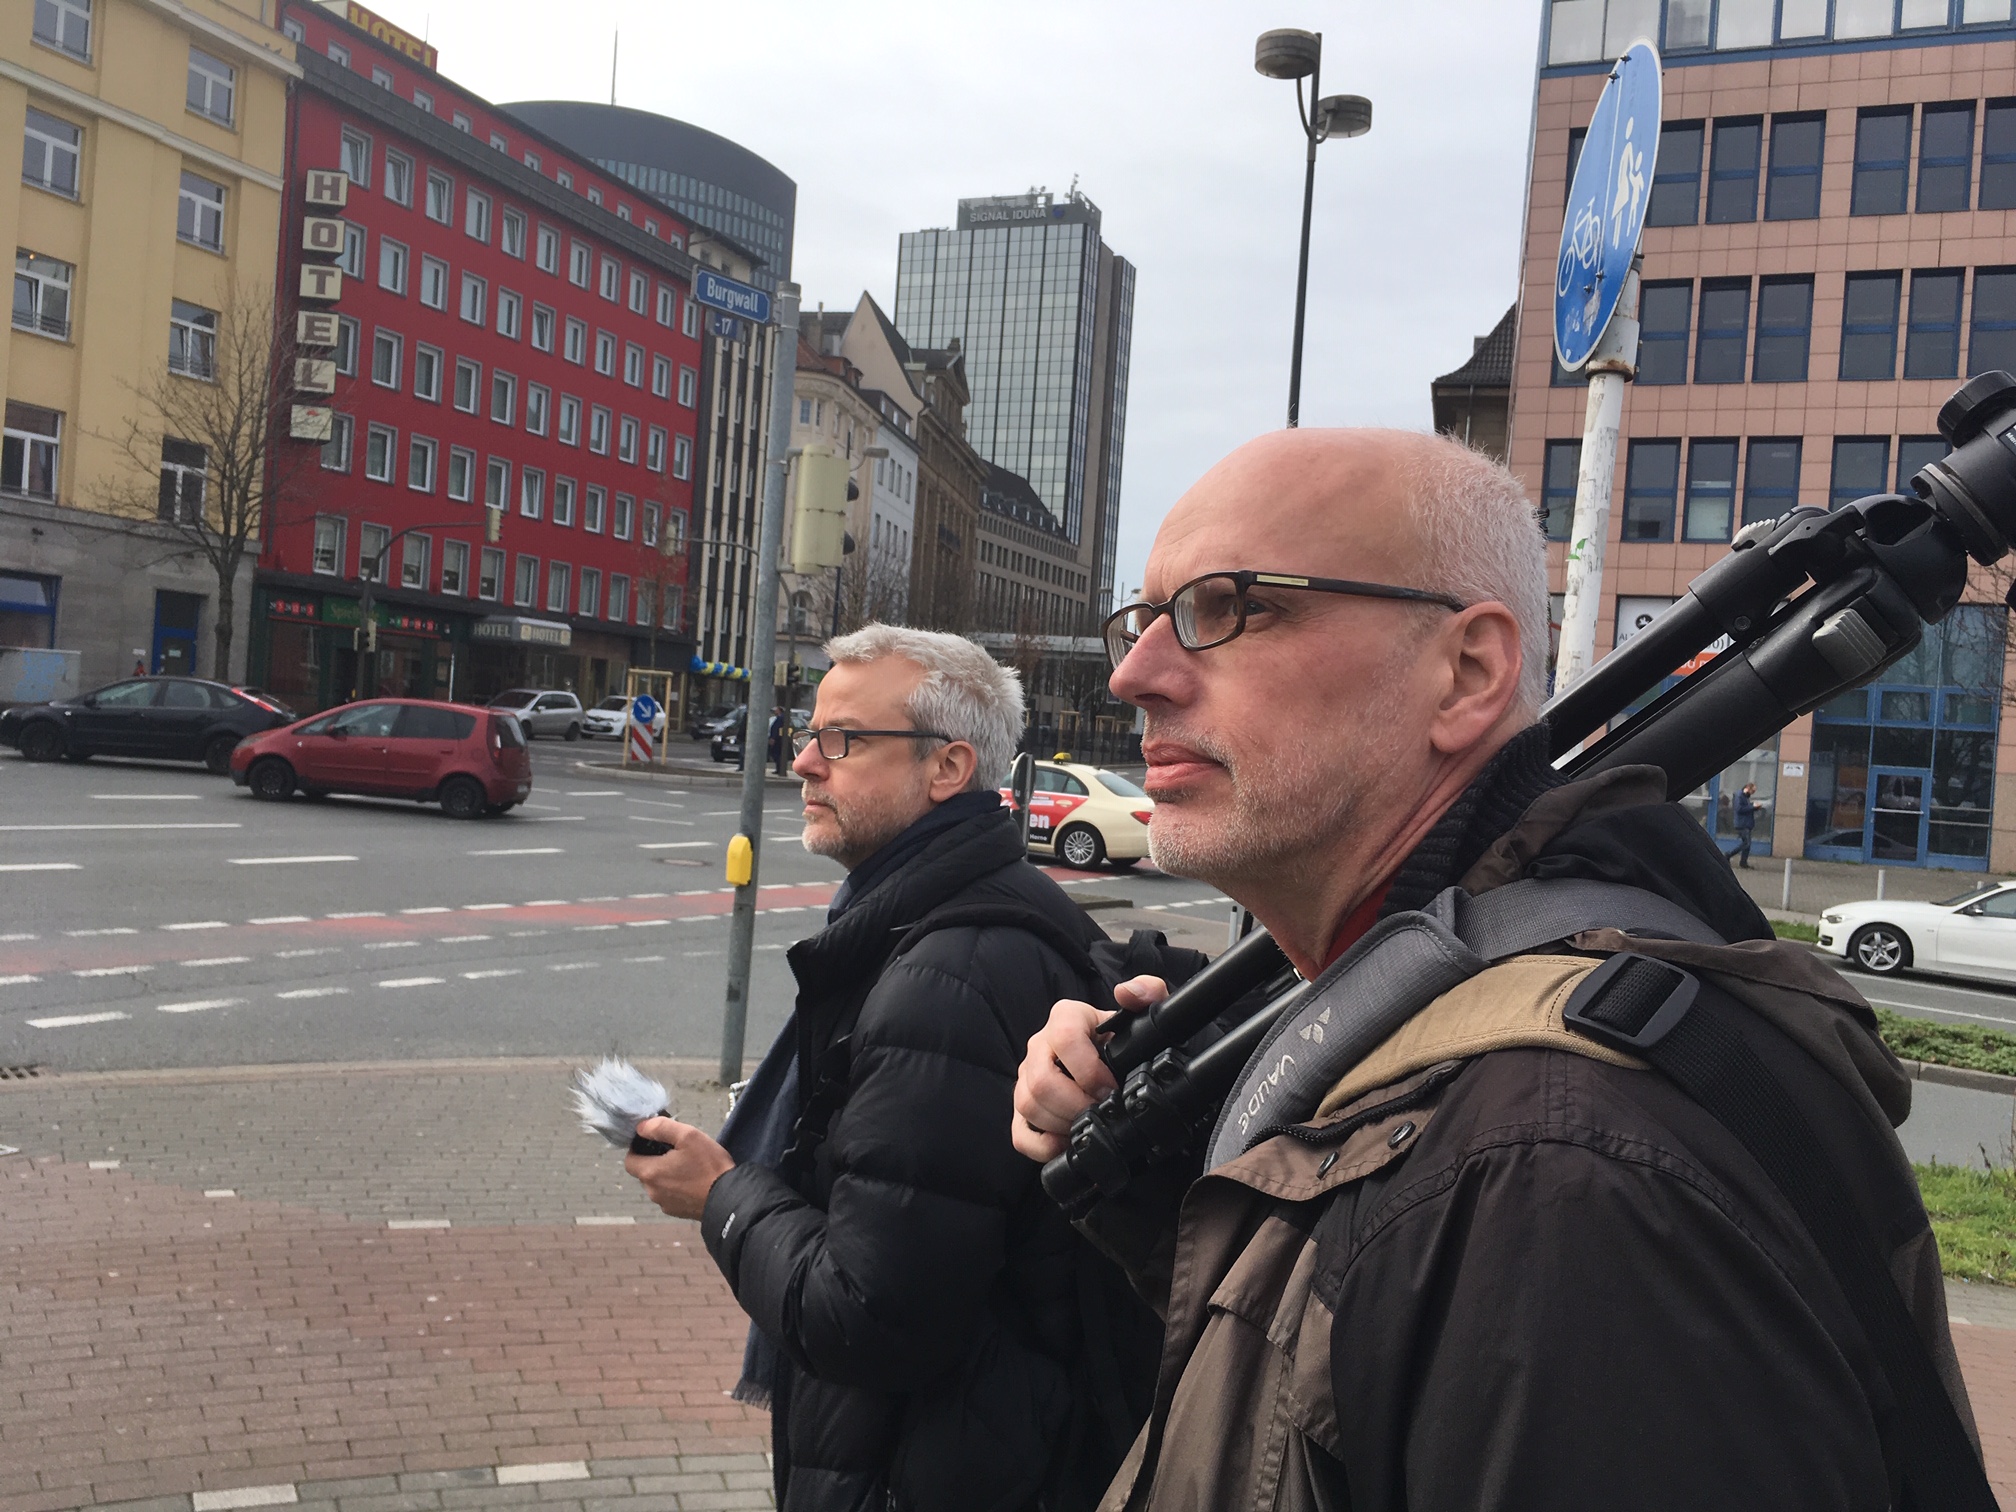 Ronald Gaube and Peter Hölscher making field recordings in the streets of Dortmund